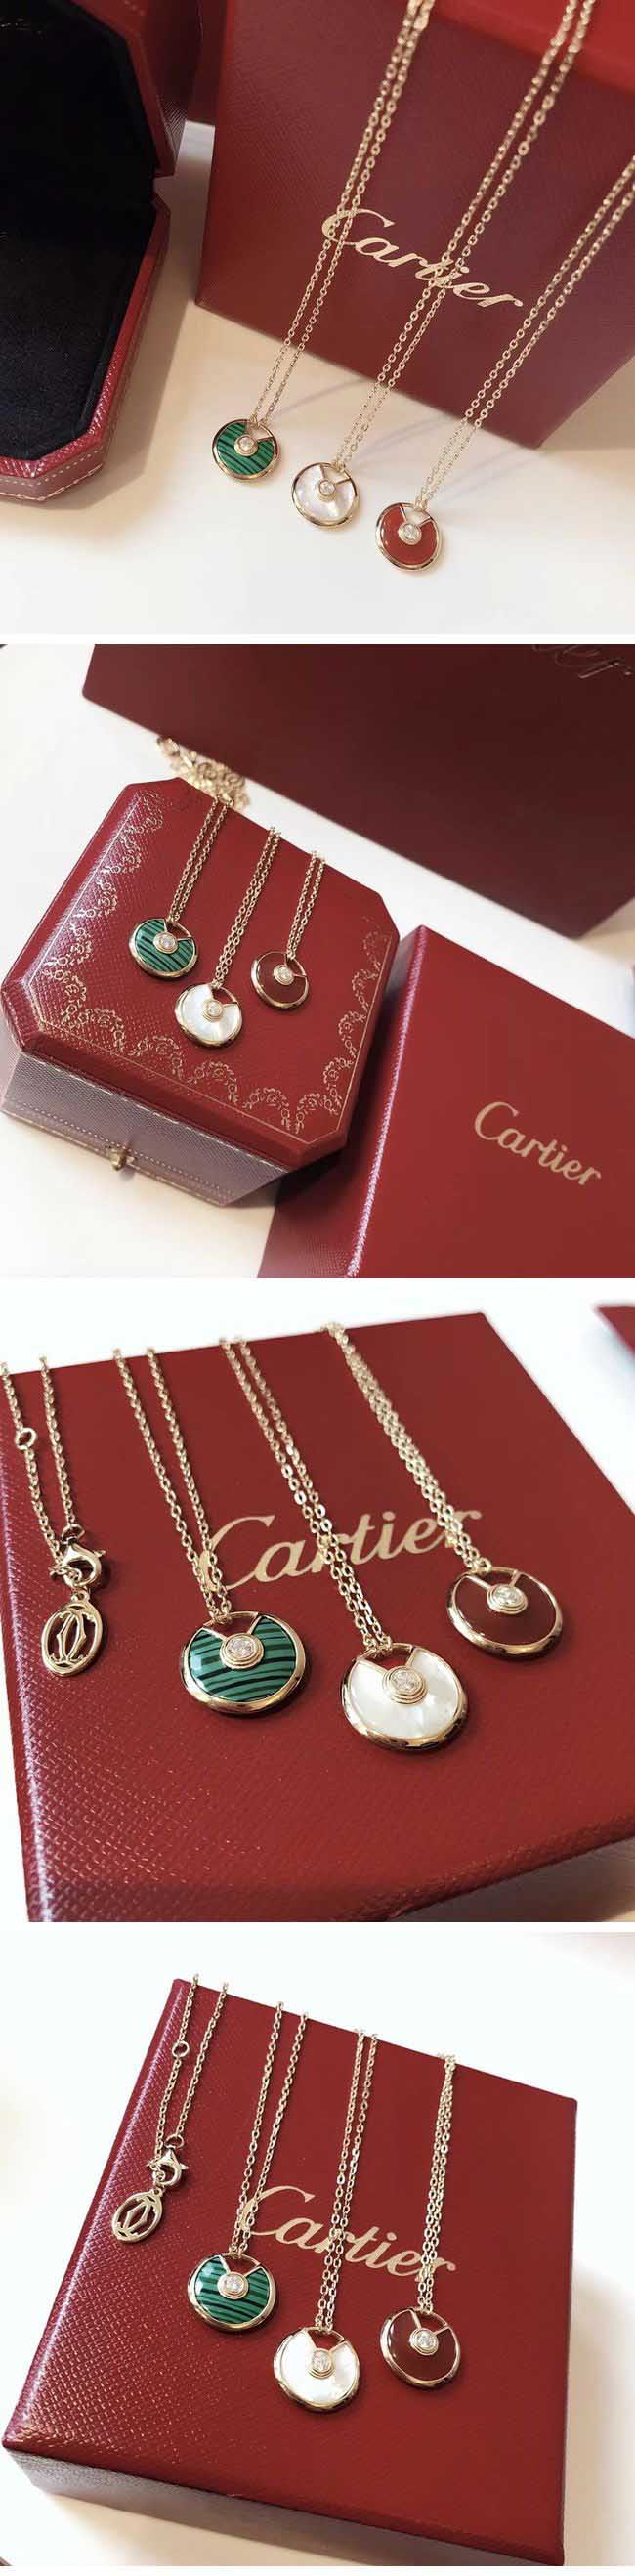 Cartier Amulette Necklace カルティエ アミュレット ネックレス